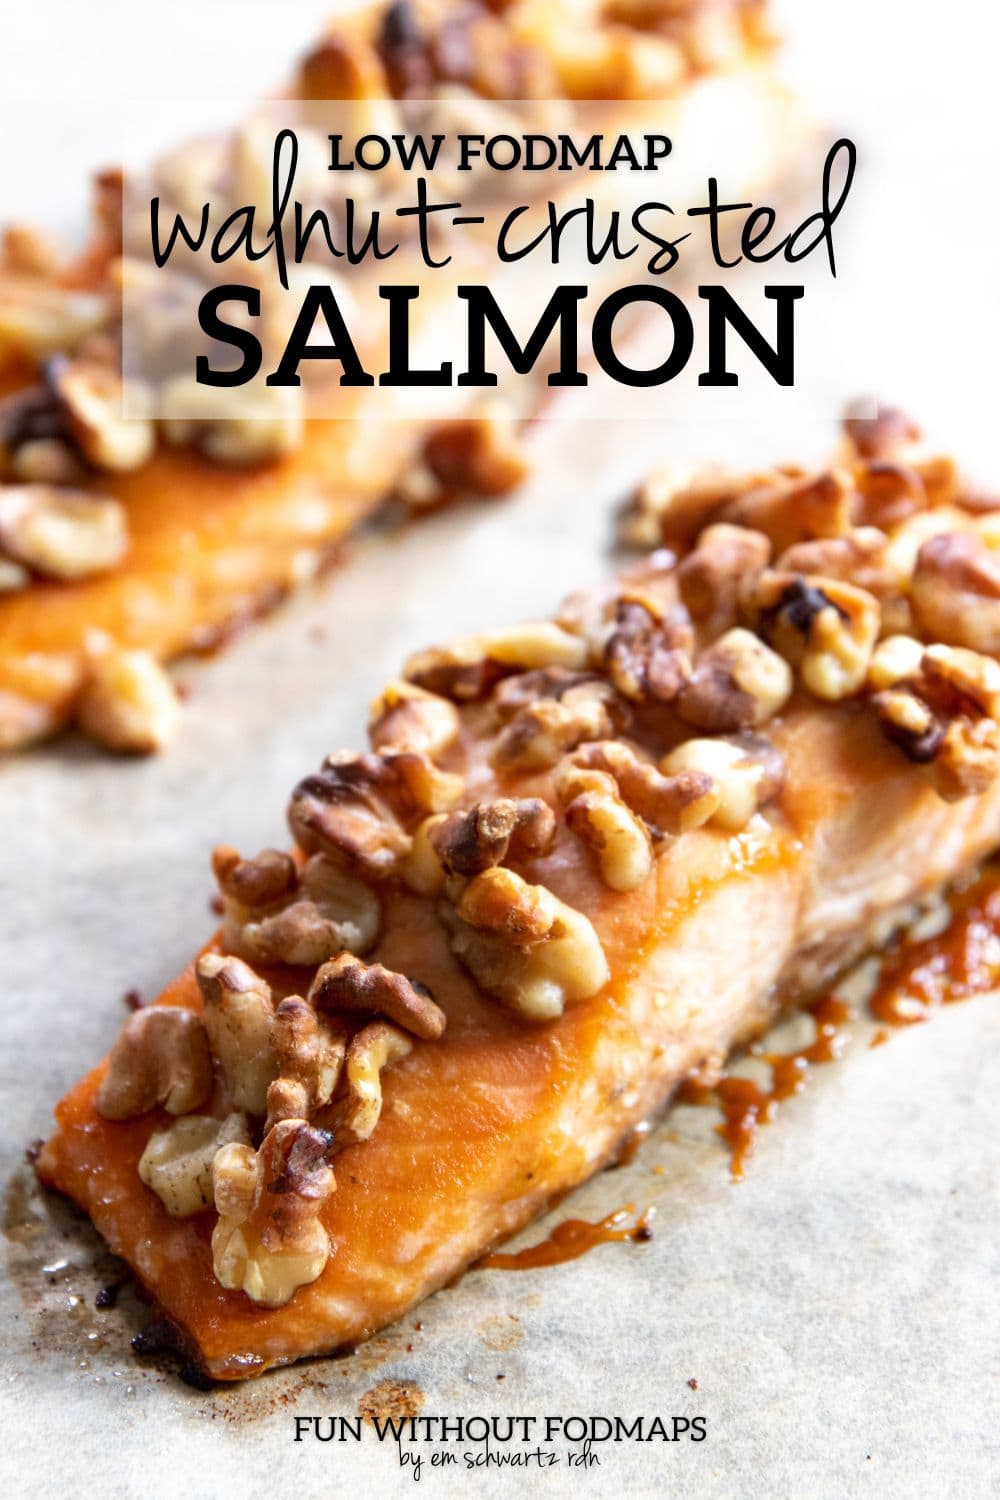 A baked salmon fillet topped with toasted walnuts. A black text overlay reads "Low FODMAP Walnut-Crusted Salmon."